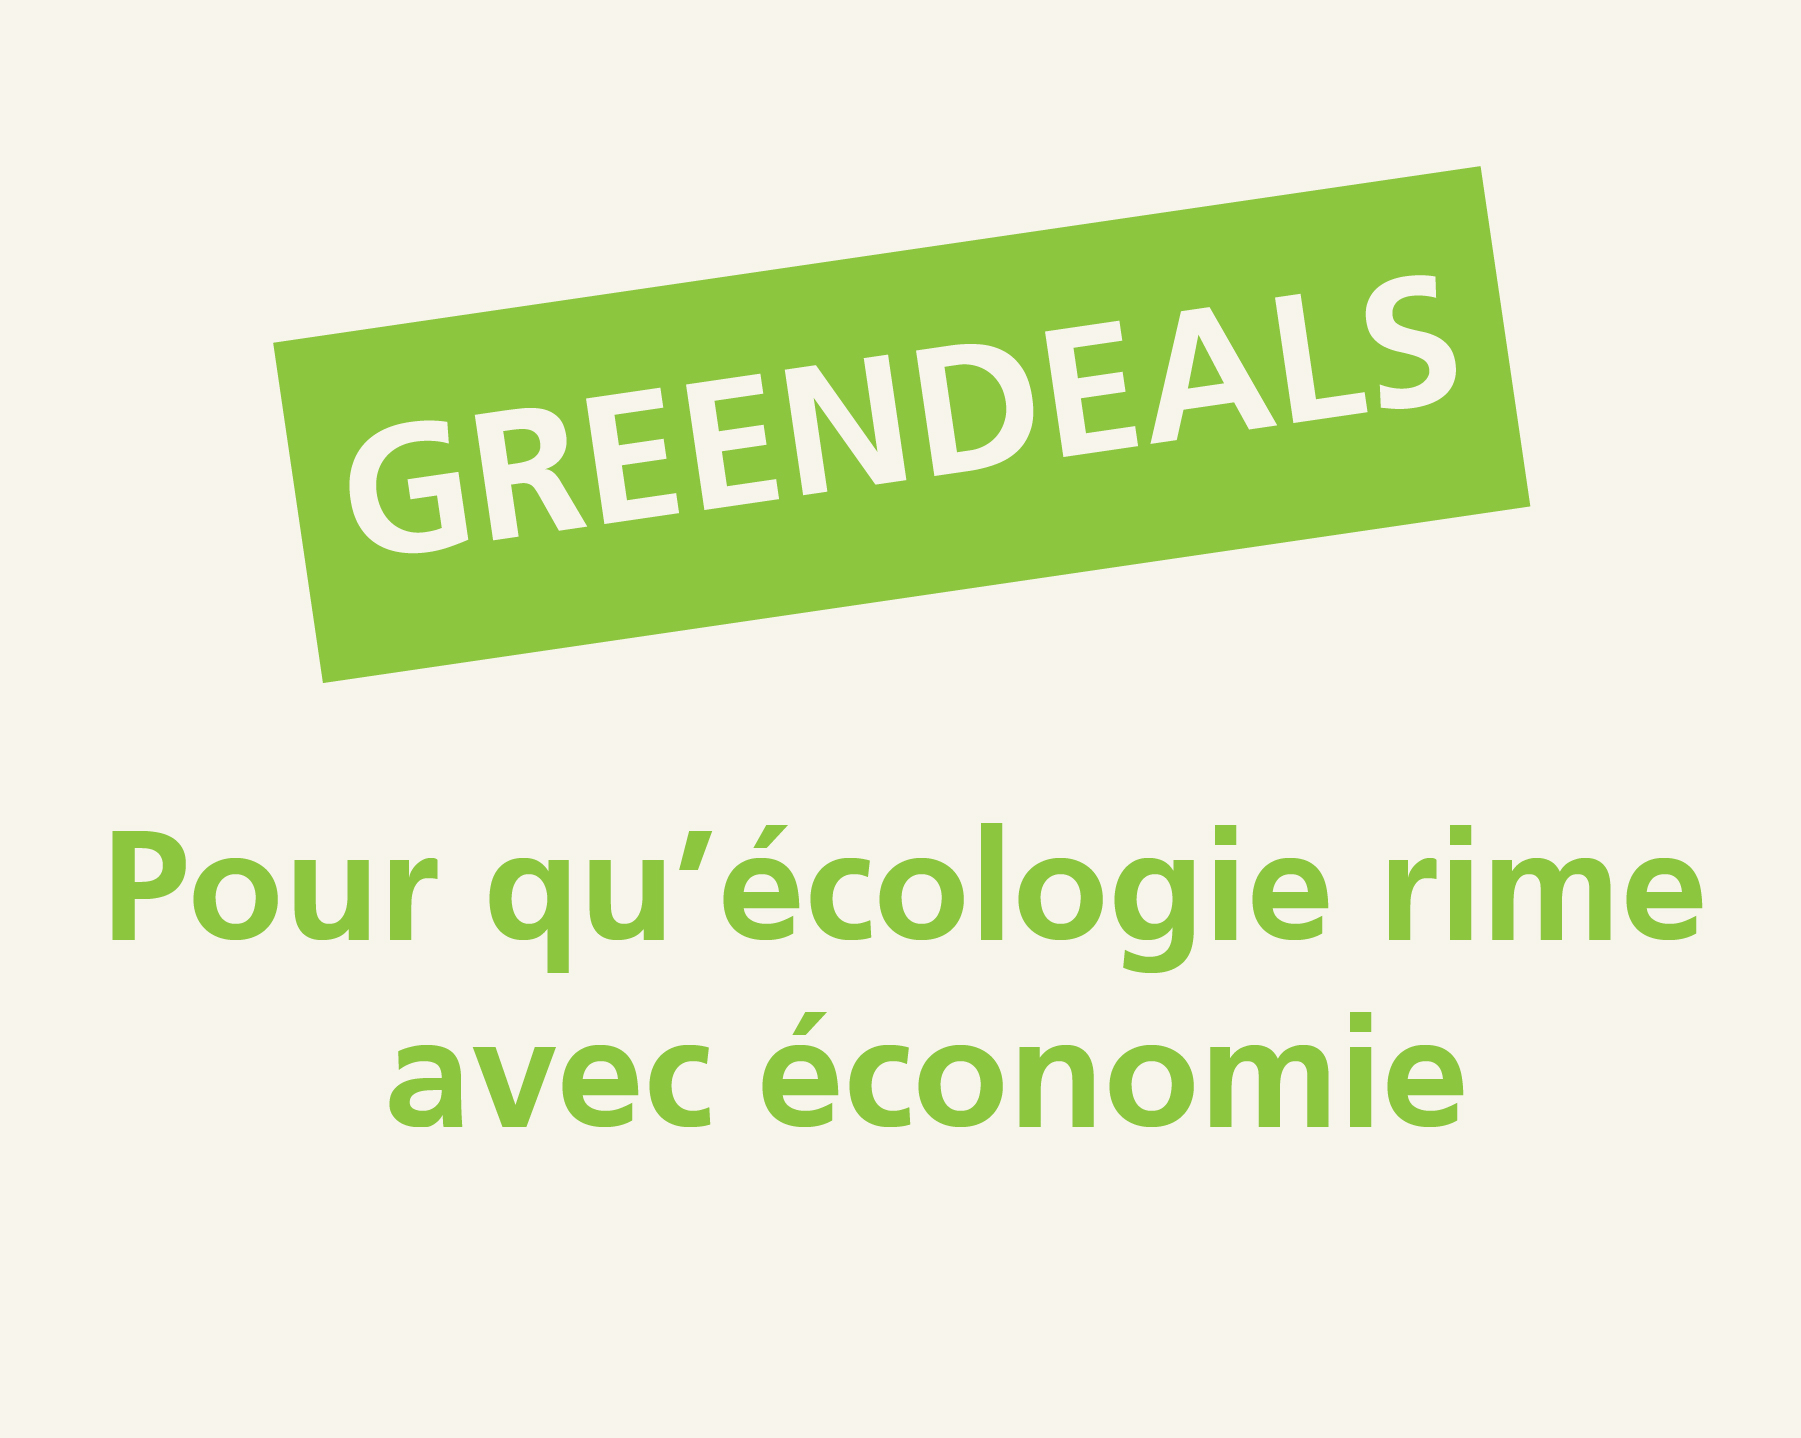 Espace Loggia launches GreenDeals: its refurbished furniture offer